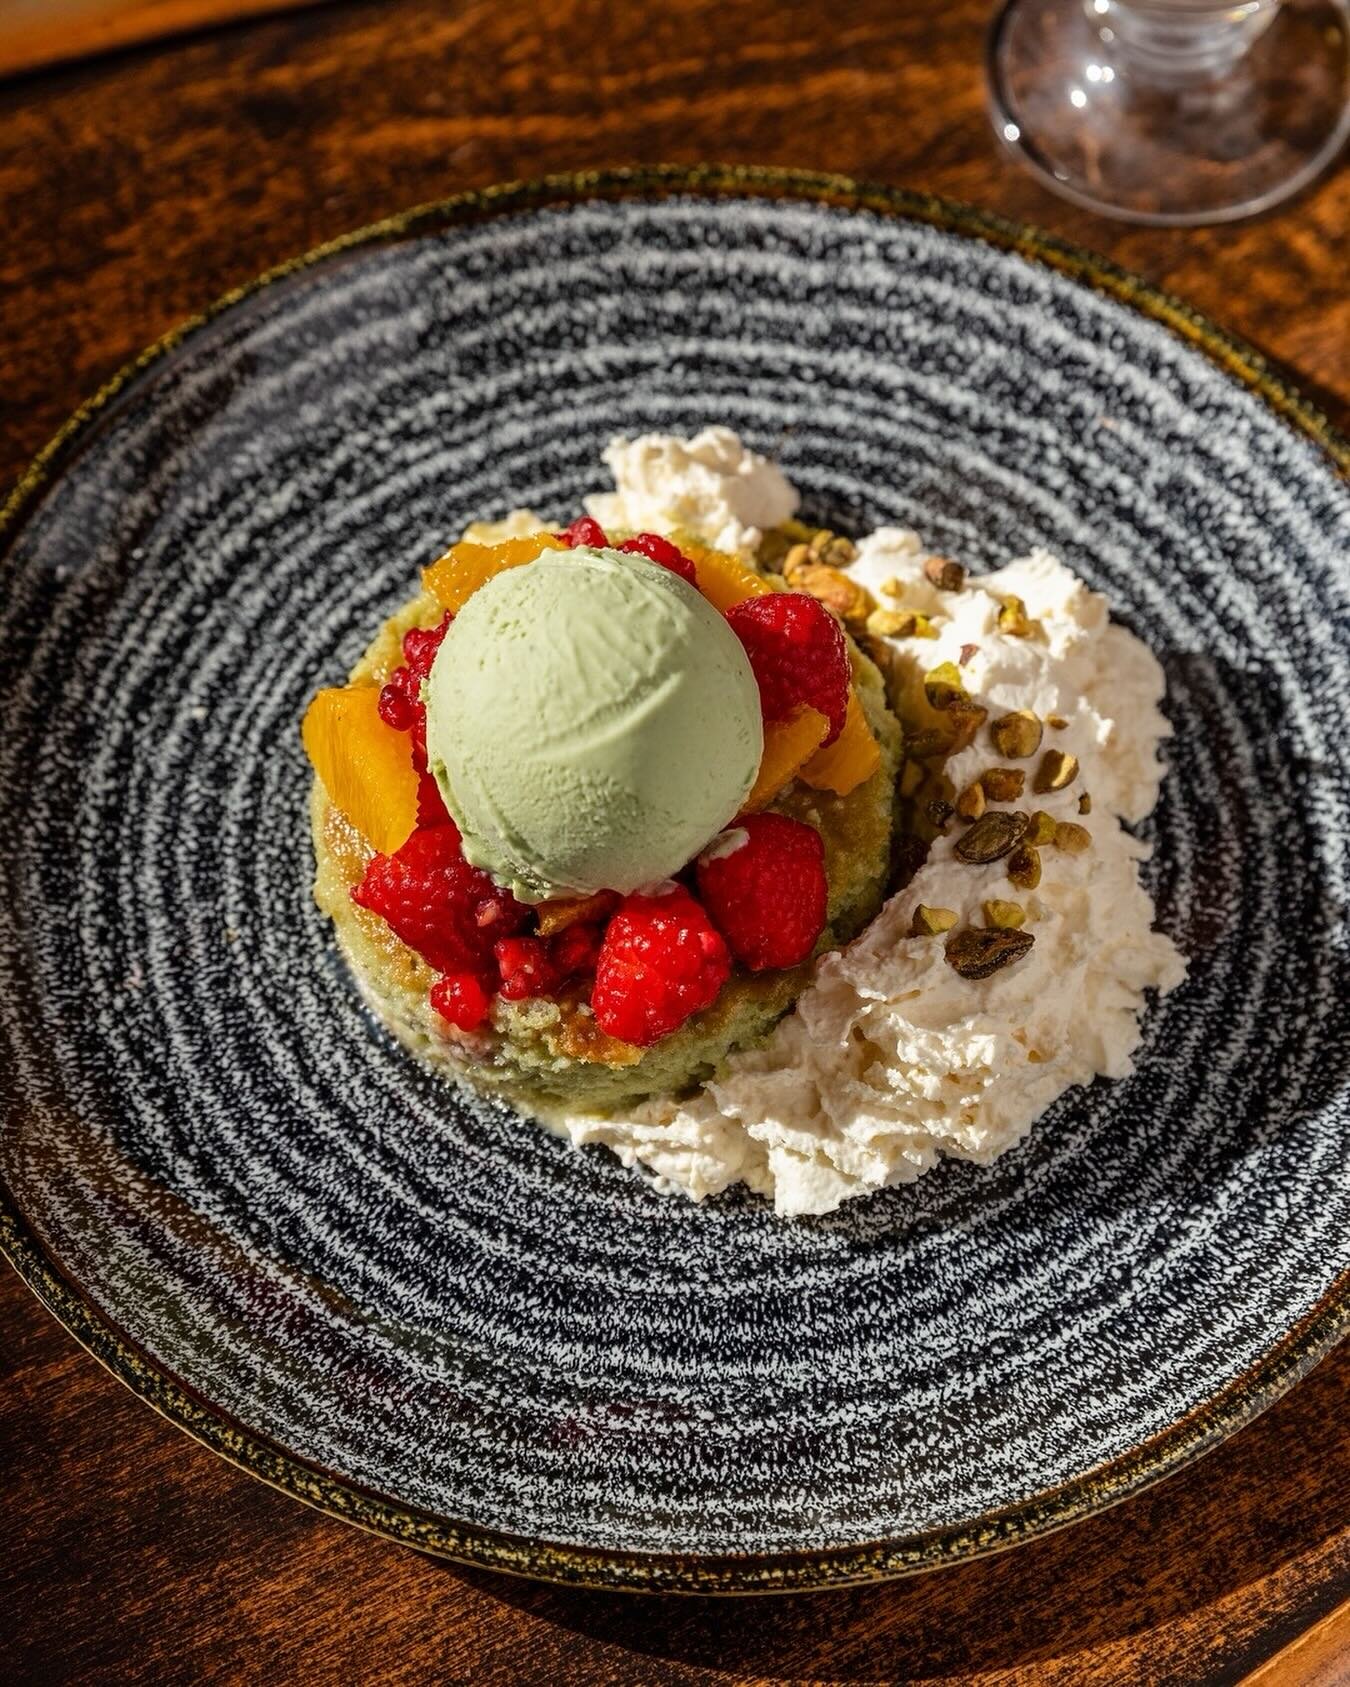 End the week on a sweeter note, with our delicious new Pistachio Cake!

PISTACHIO CAKE
pistachio gelato . chantilly . pistachios . orange . raspberries 

New to the dessert menu, and oh-so-delicious&hellip;&nbsp;seriously, be sure to save room for de